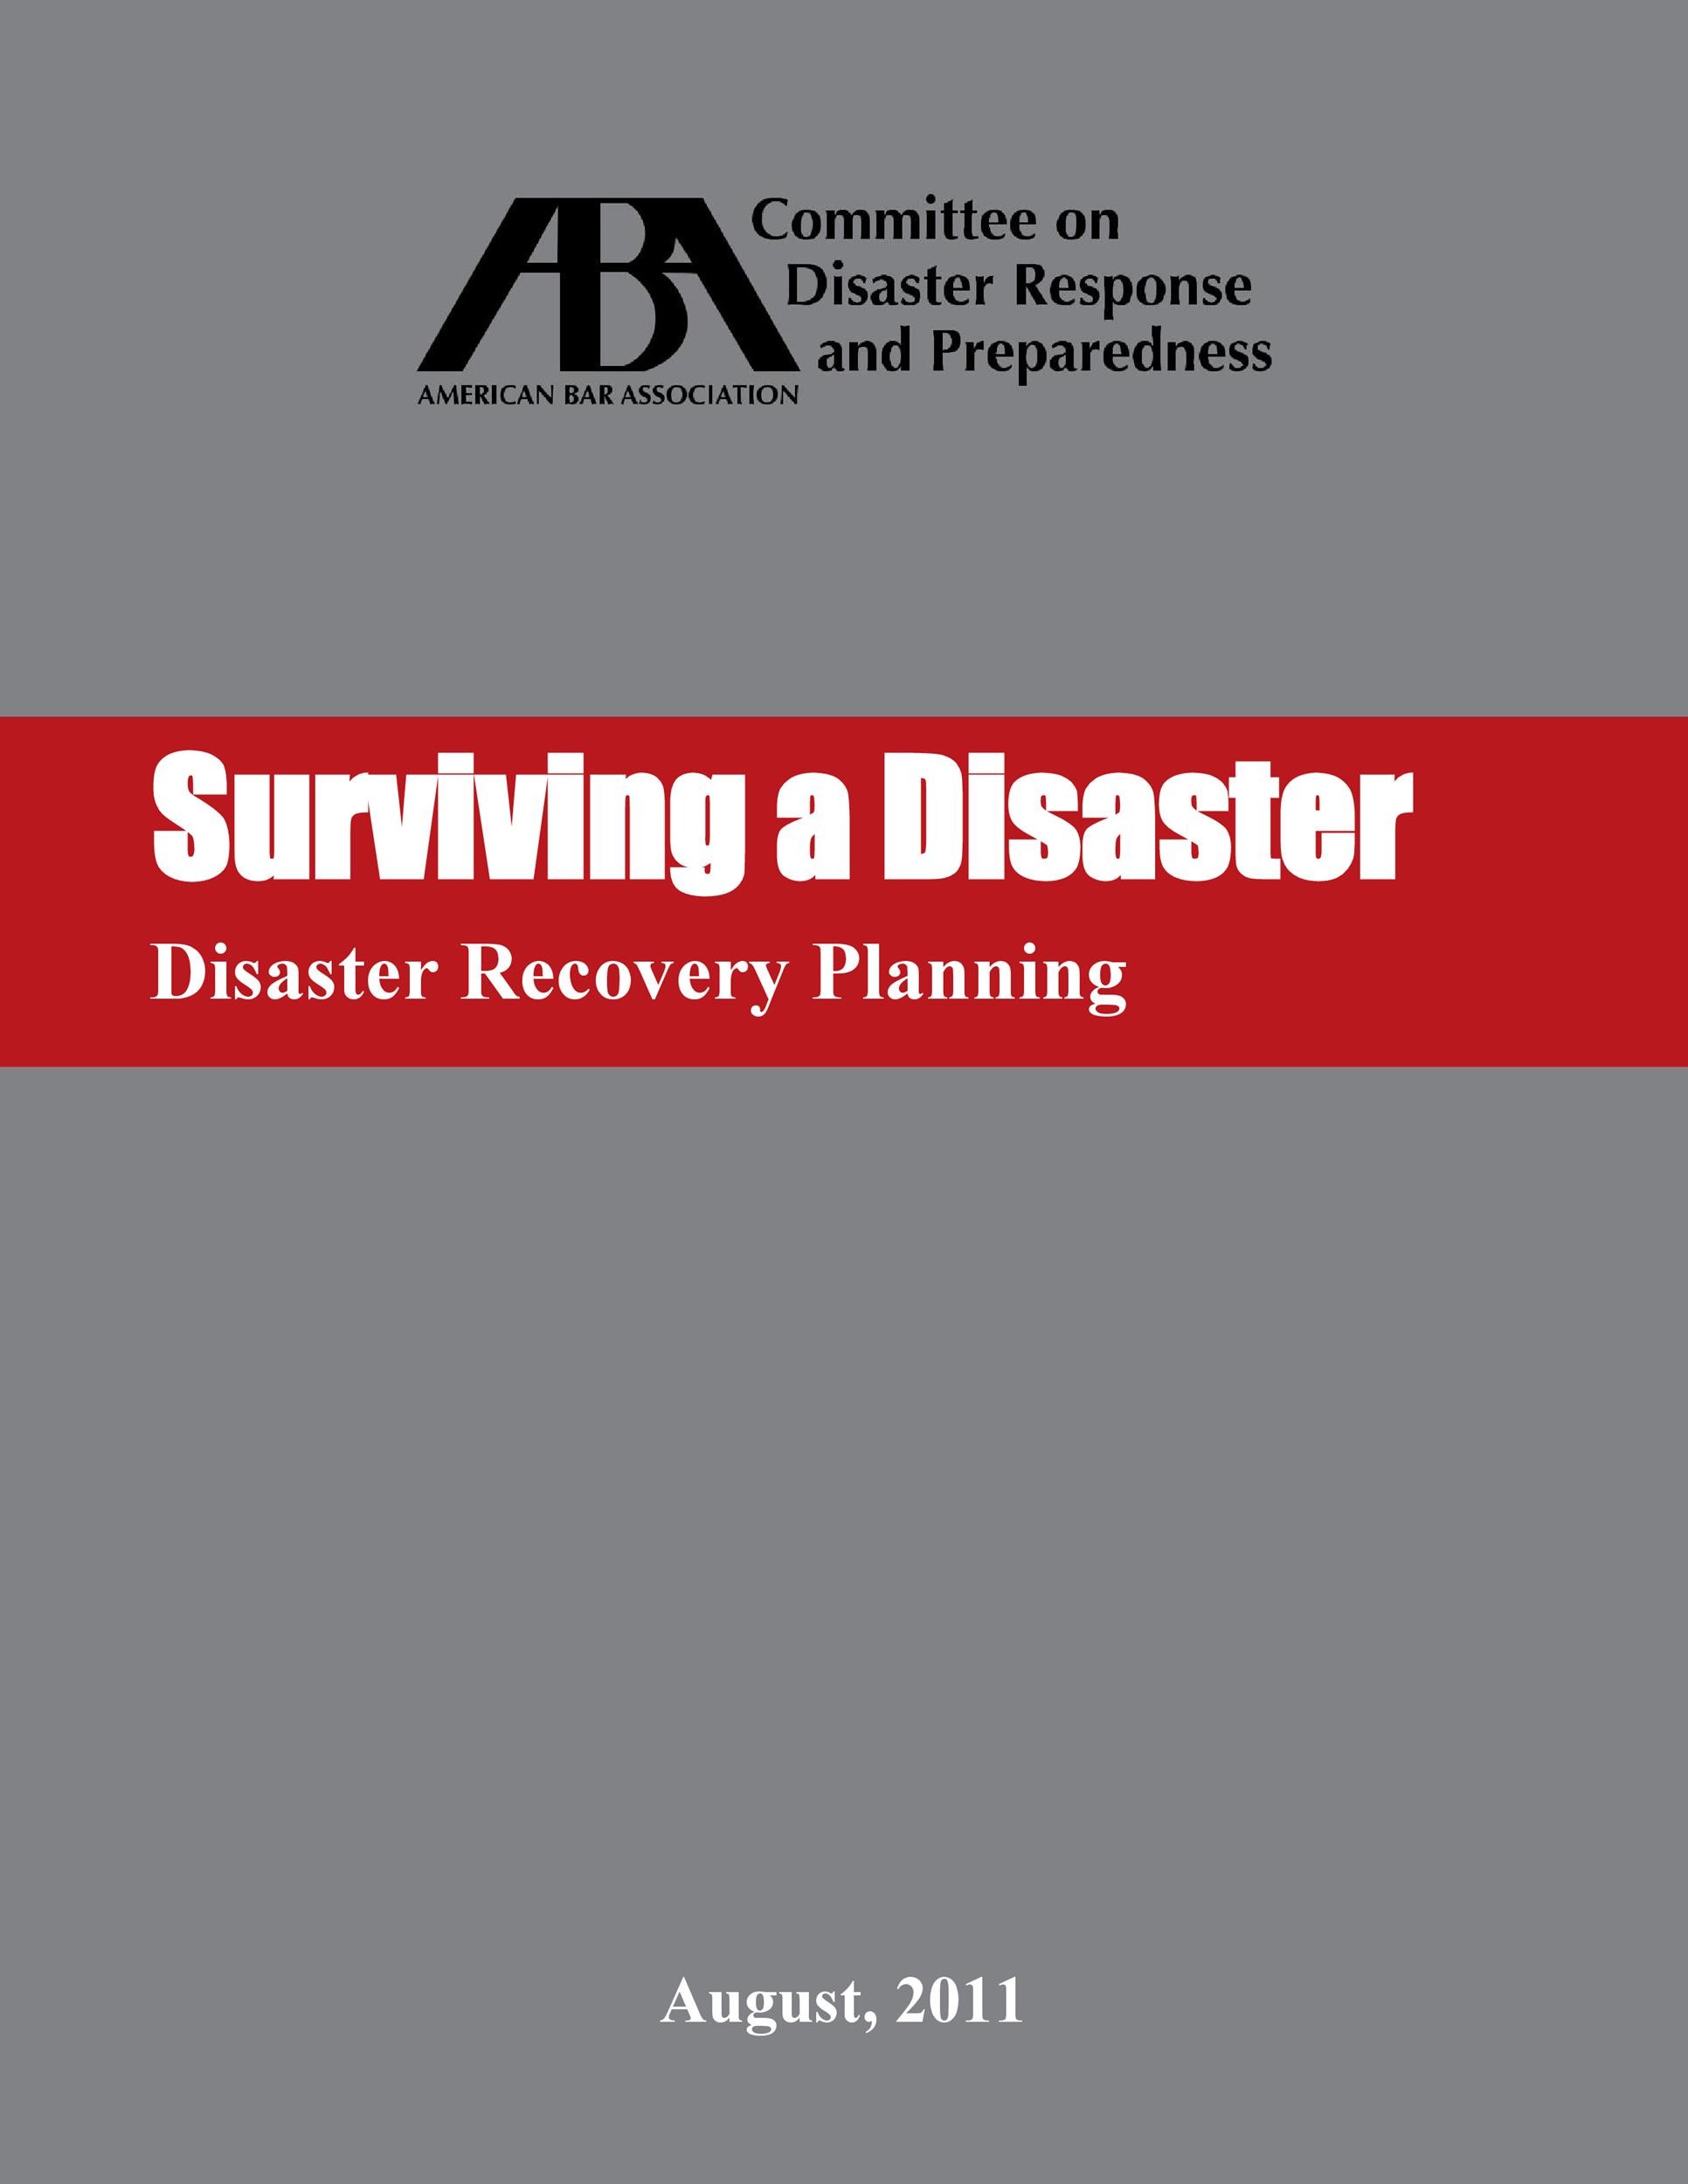 52 Effective Disaster Recovery Plan Templates Drp Templatelab